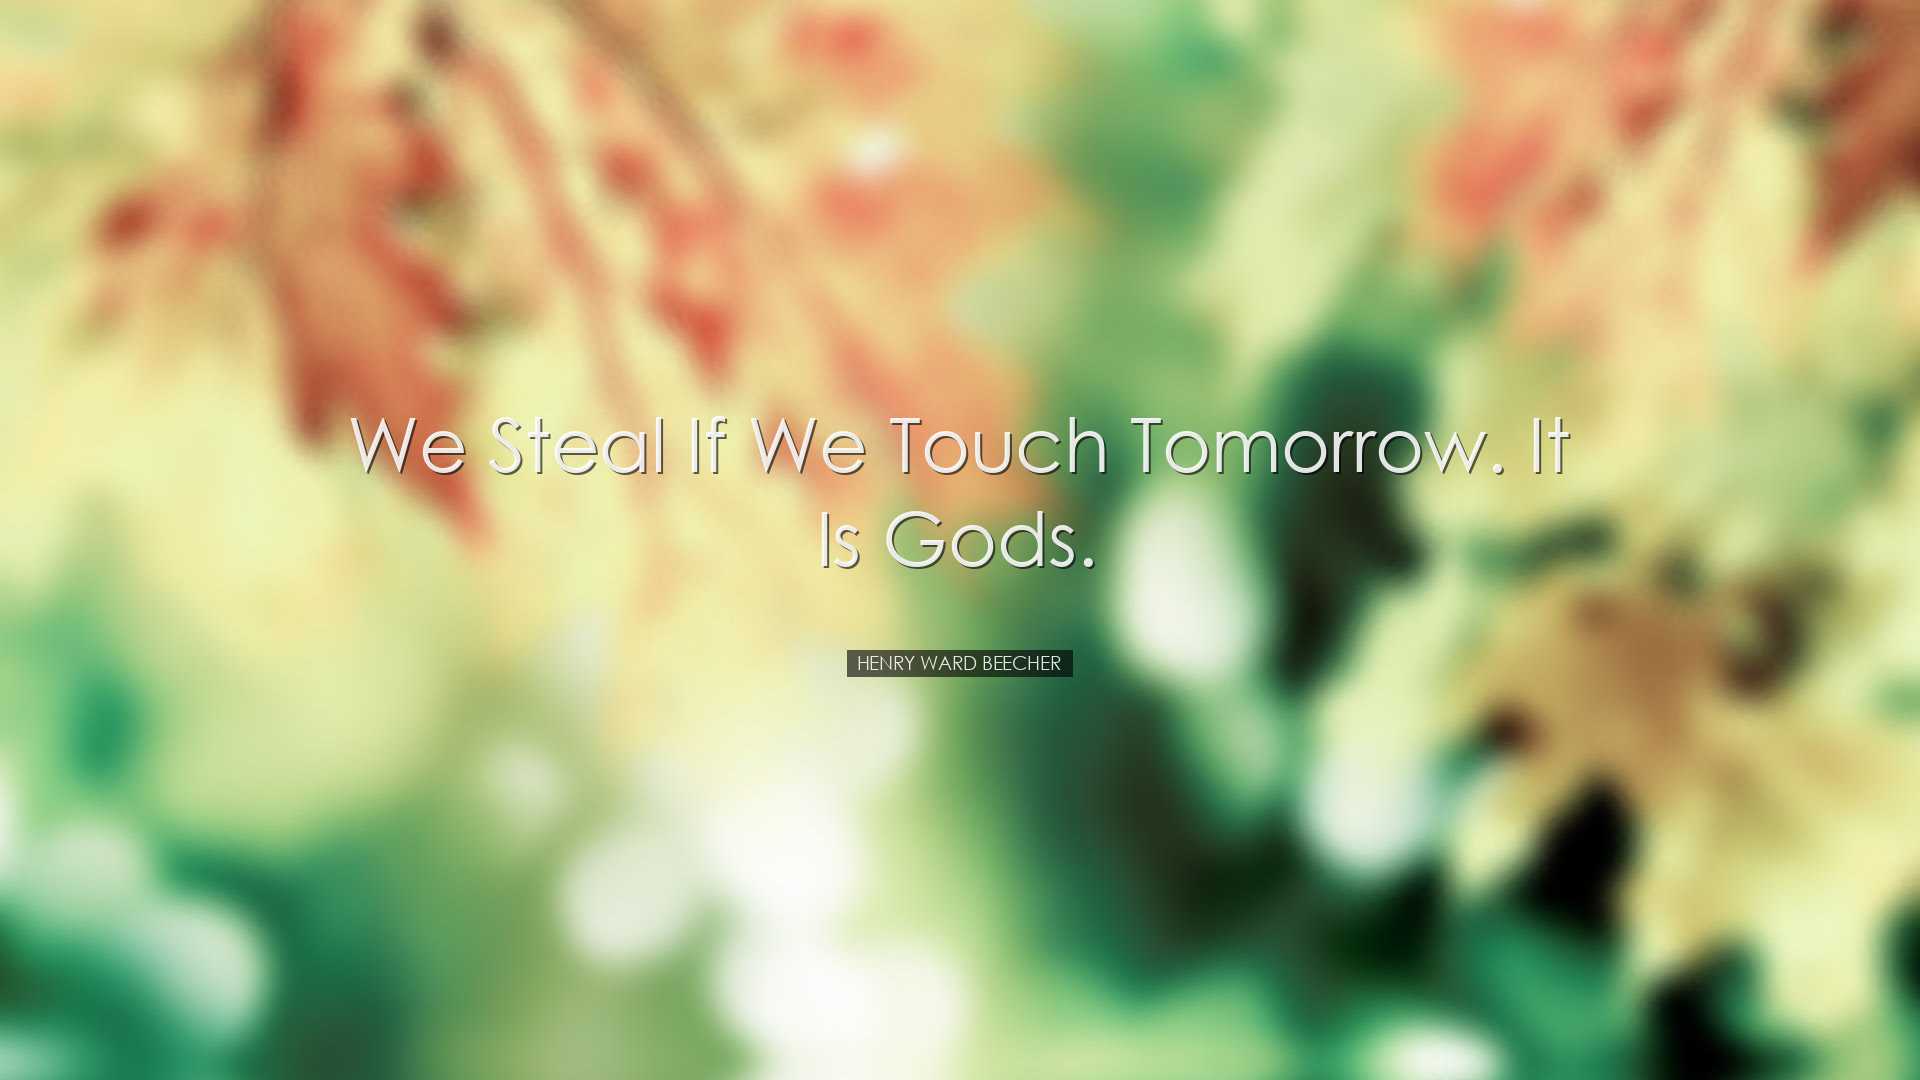 We steal if we touch tomorrow. It is Gods. - Henry Ward Beecher